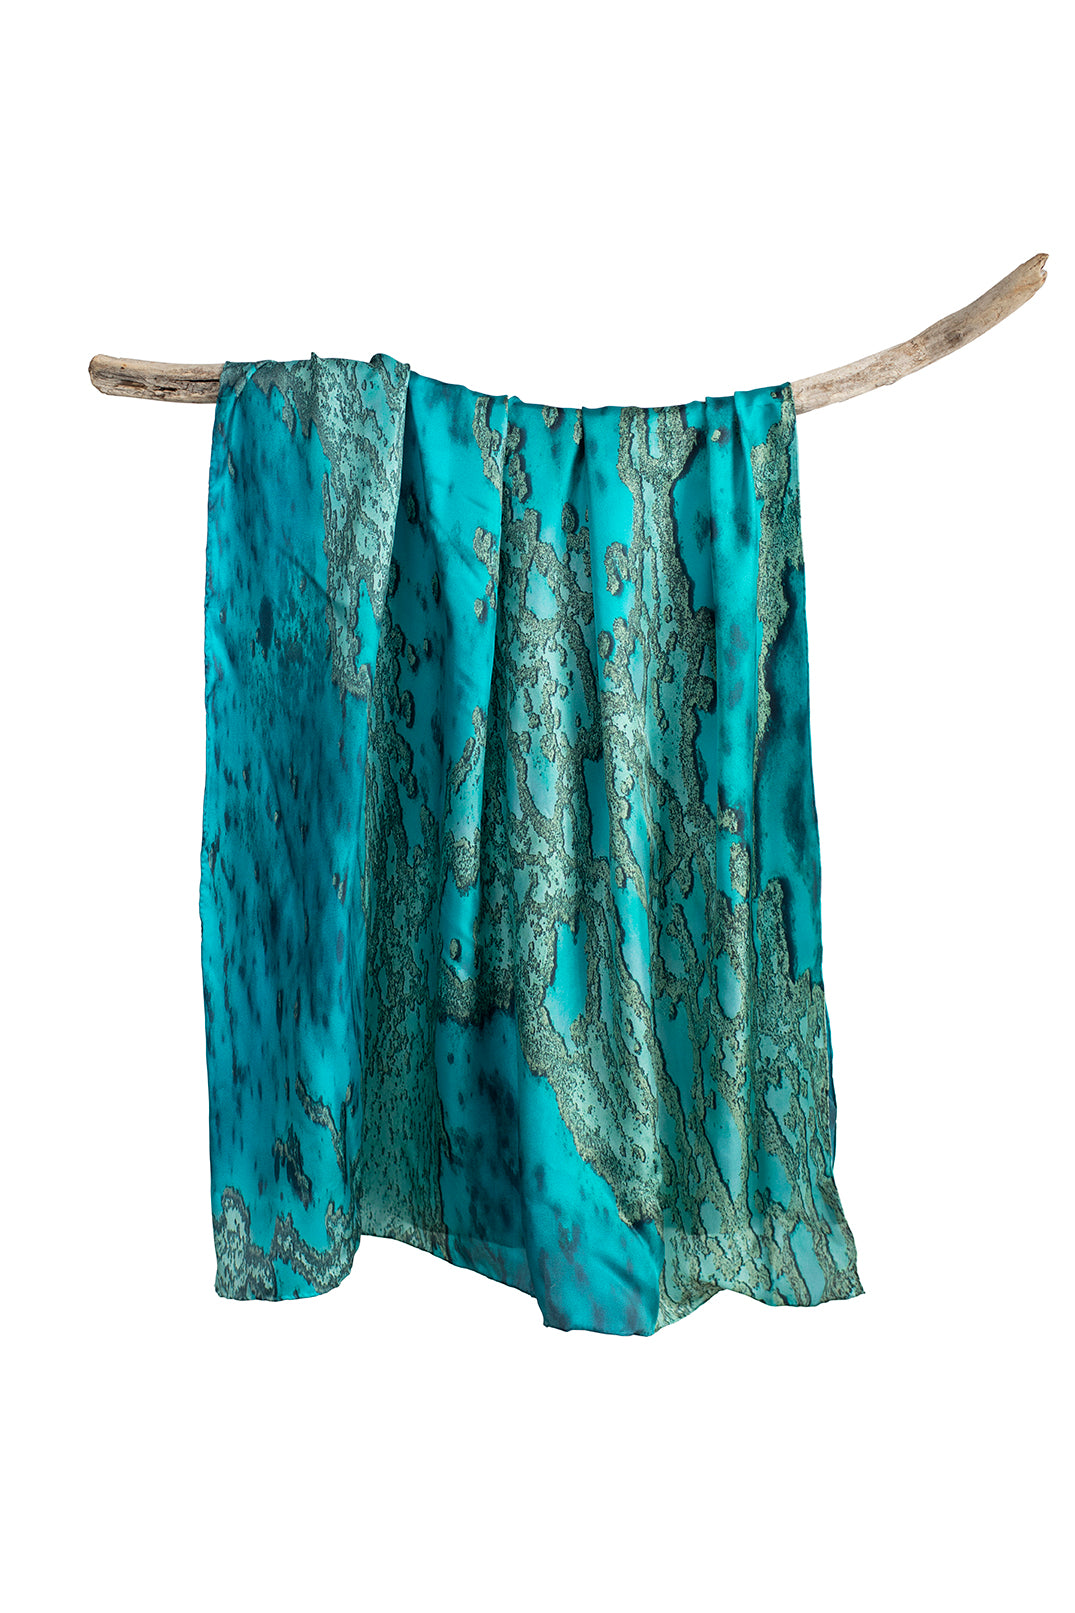 Silk Sarong Coral Veins Print of Coral reef veins spread across green, blue, aqua, turquise coloured water